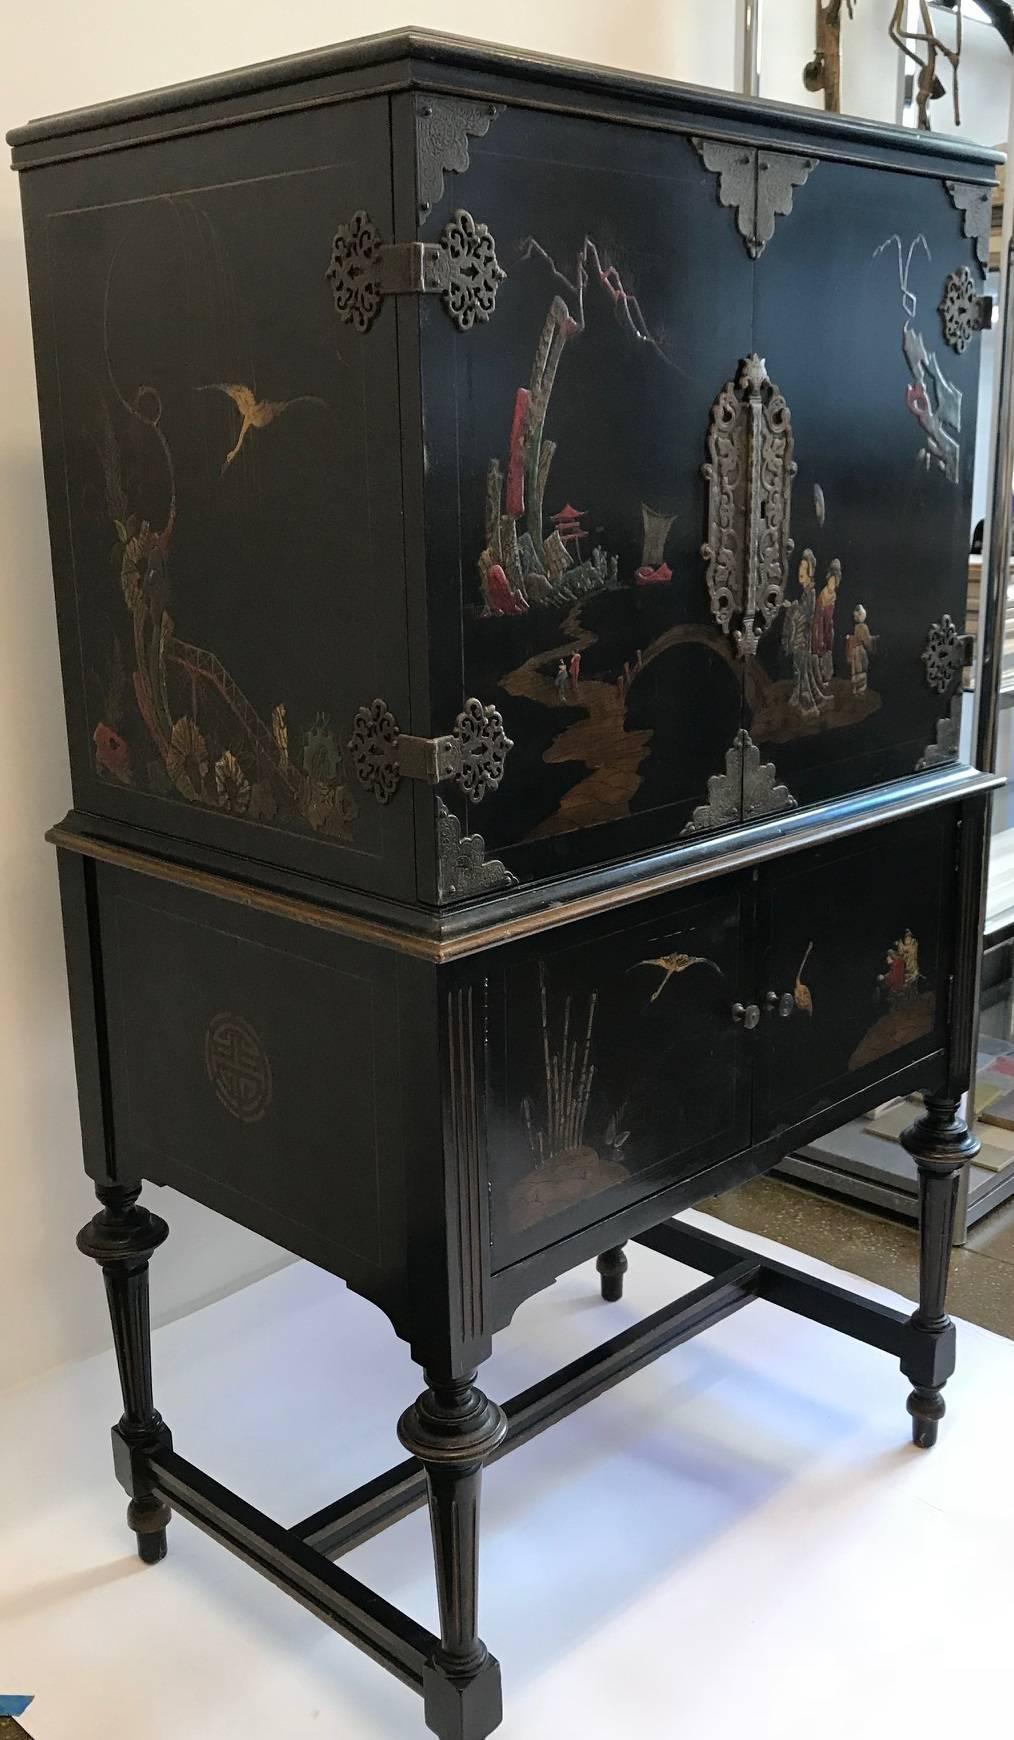 Unique Chinese style hand painted cabinet made in the USA in the 1920's